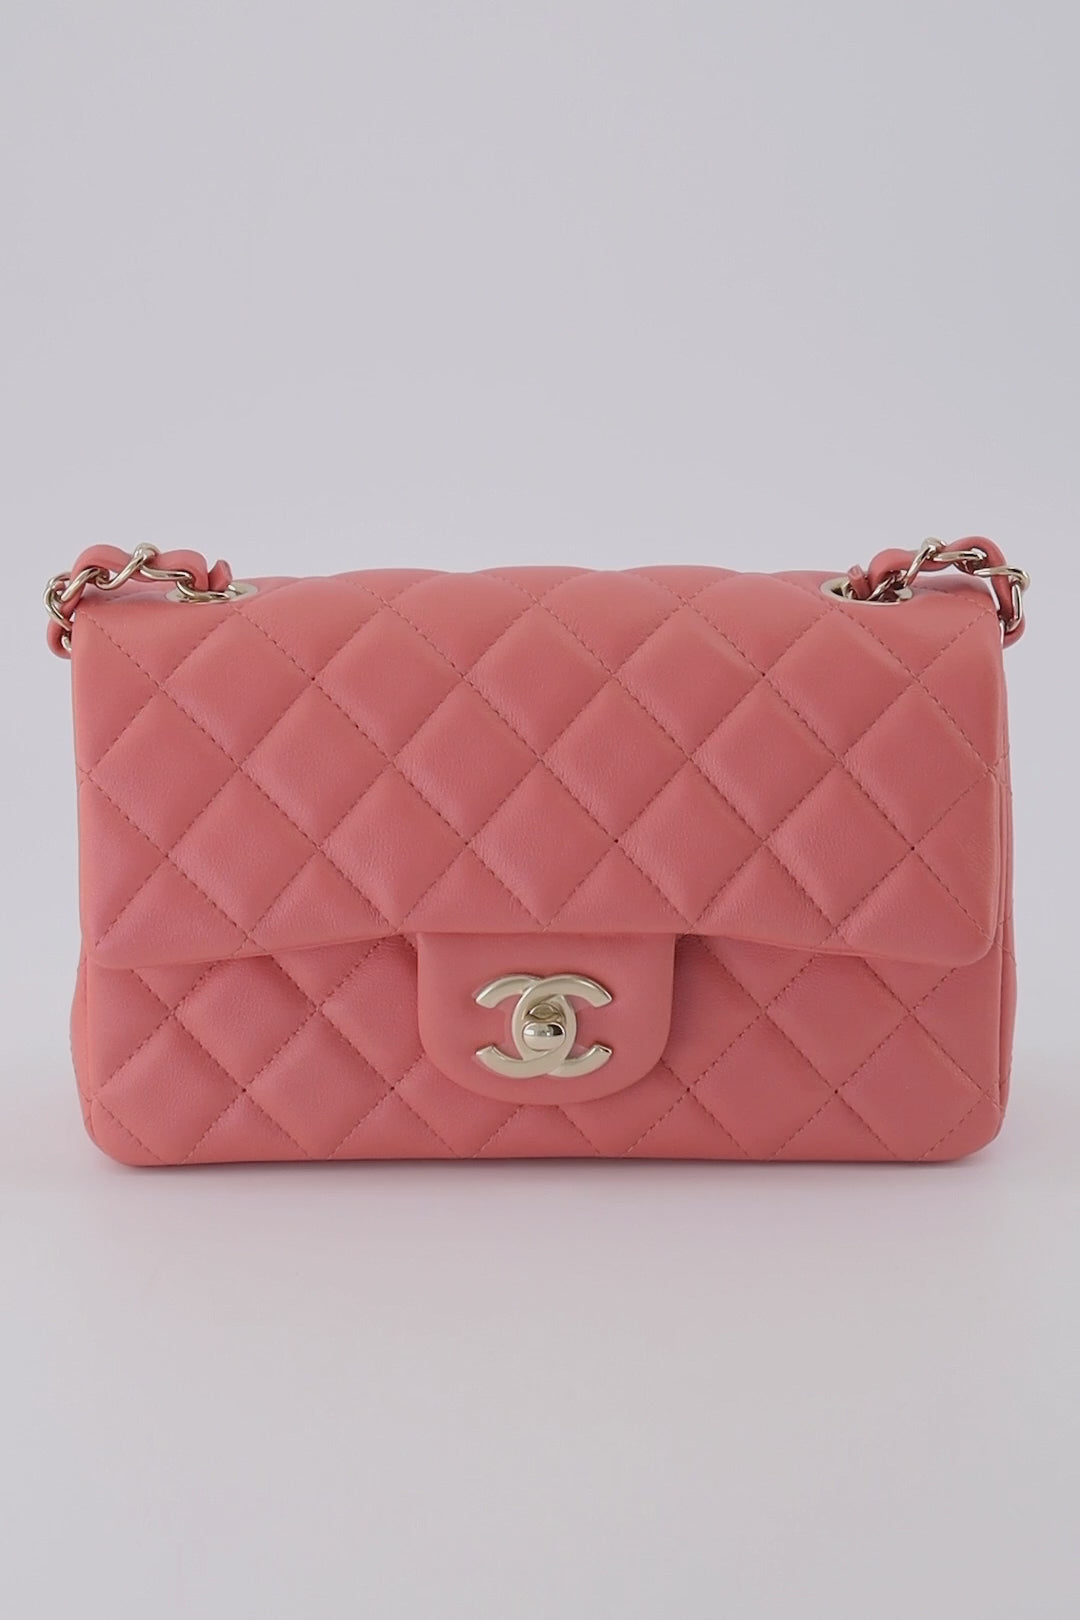 chanel mini flap bag with top handle white